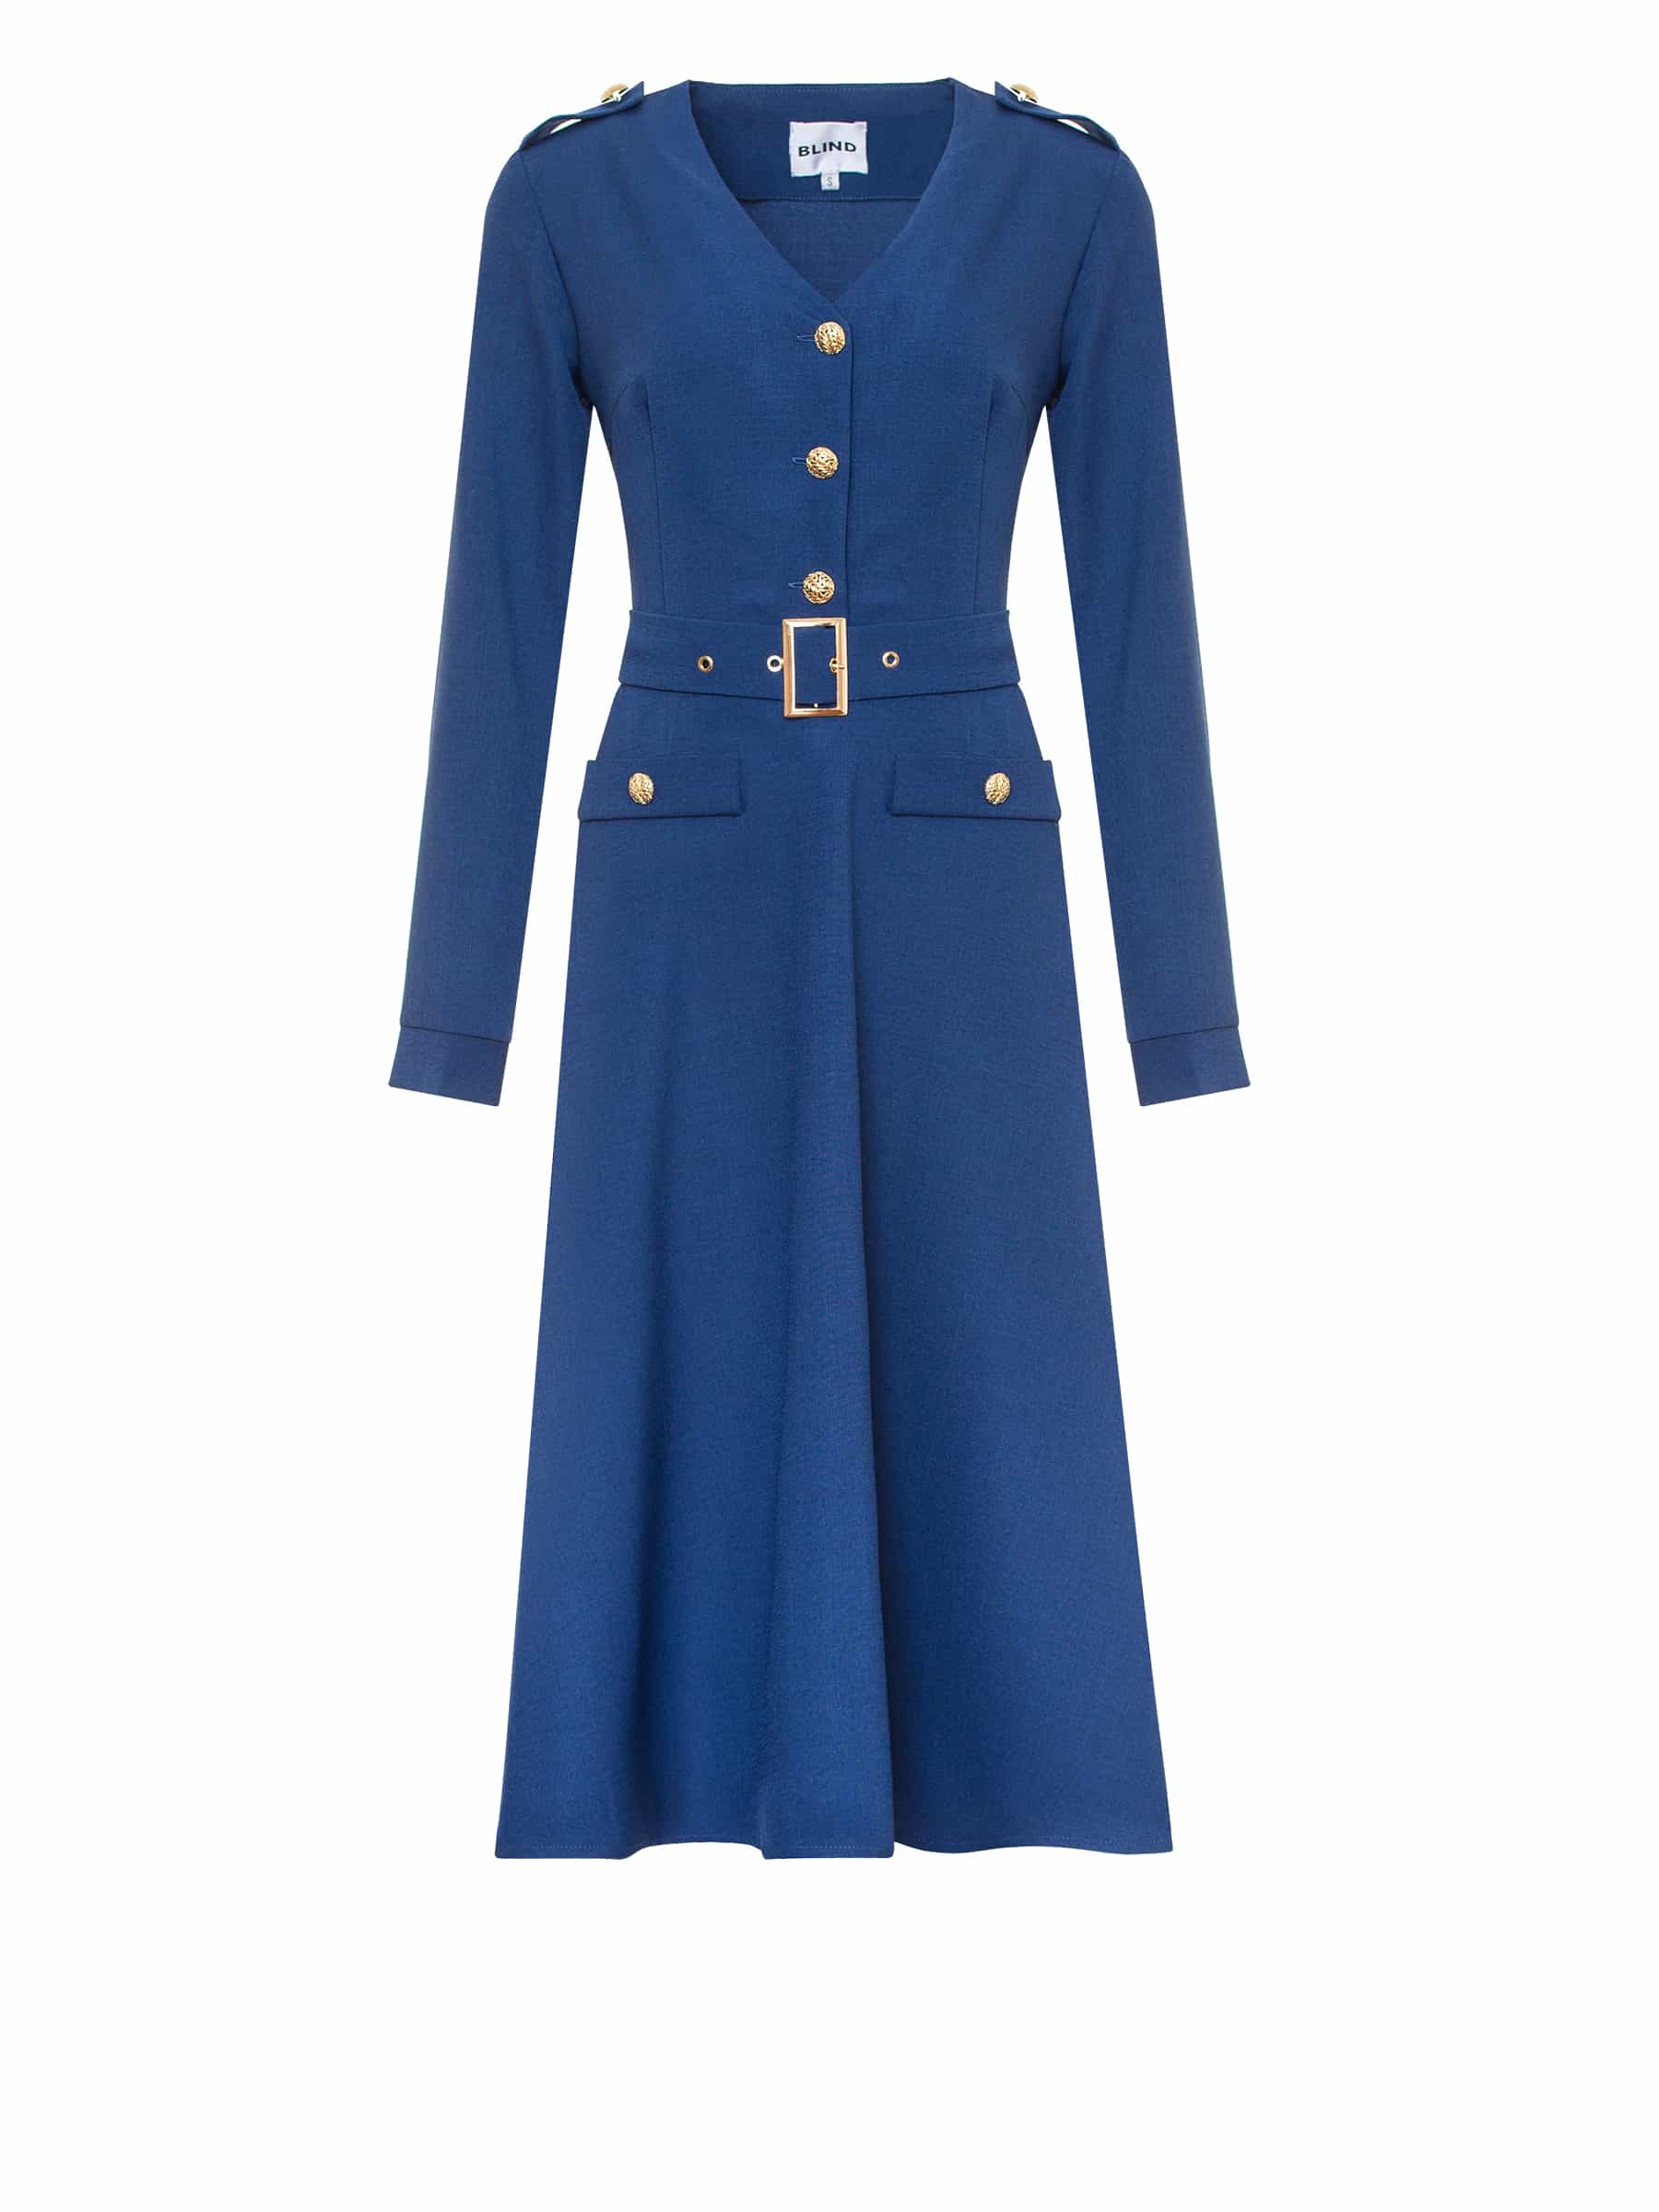 Blue dress in fine suit wool with straps and metal buttons